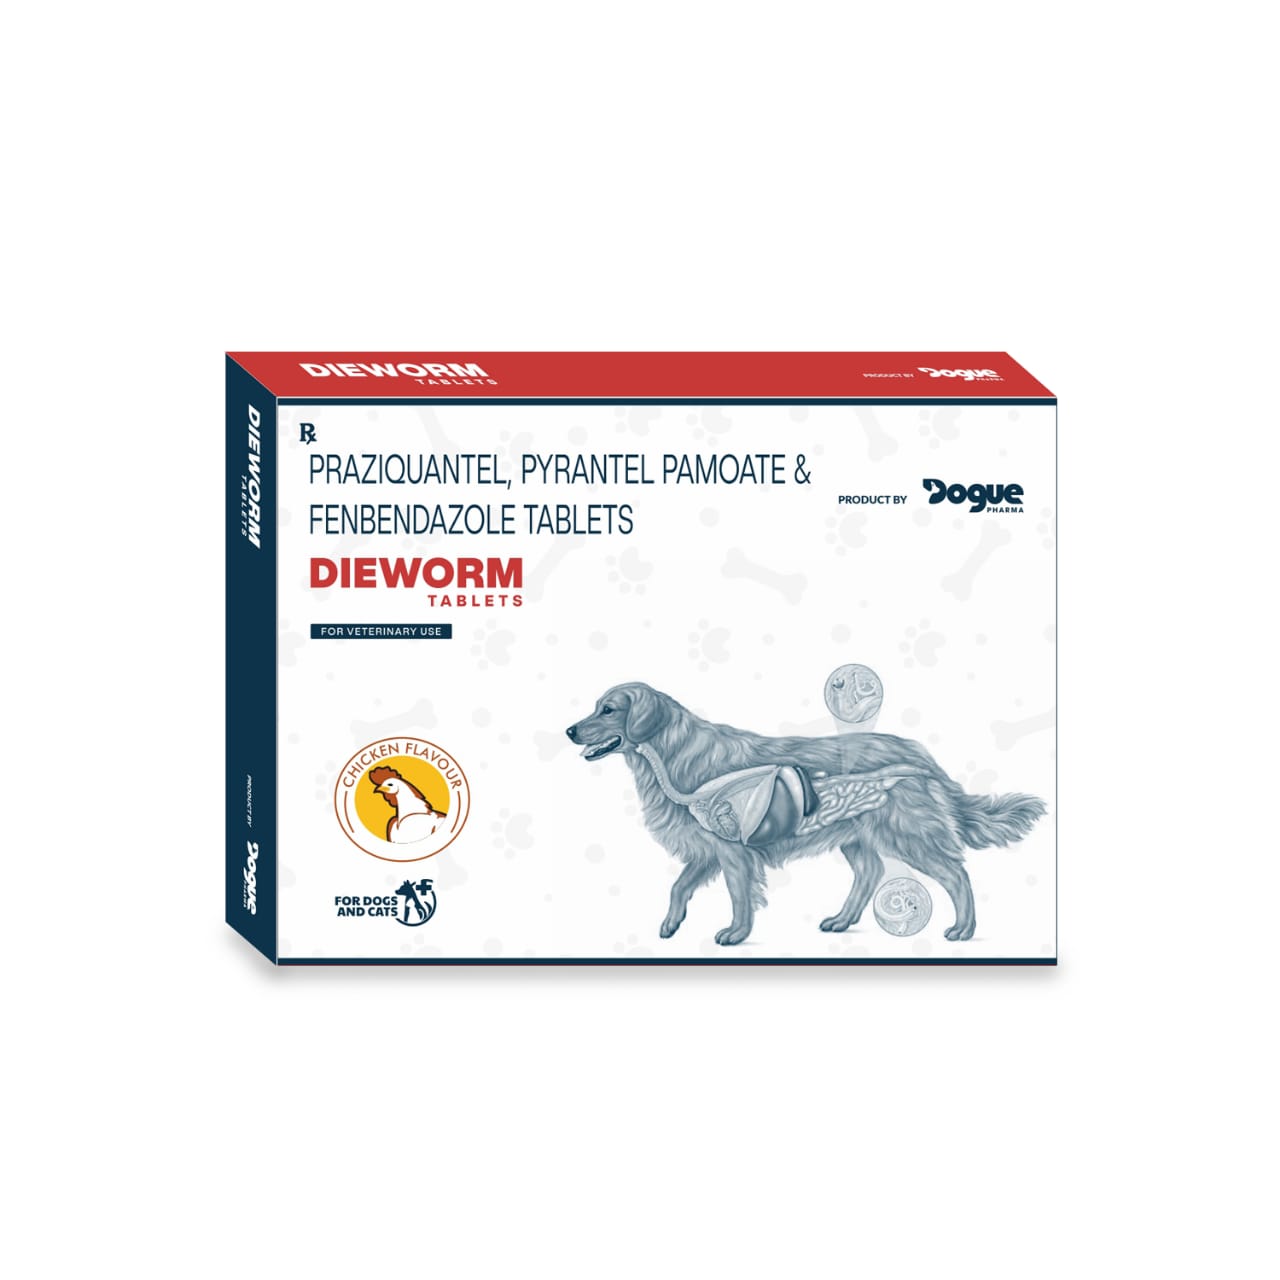 Dieworm Tablets